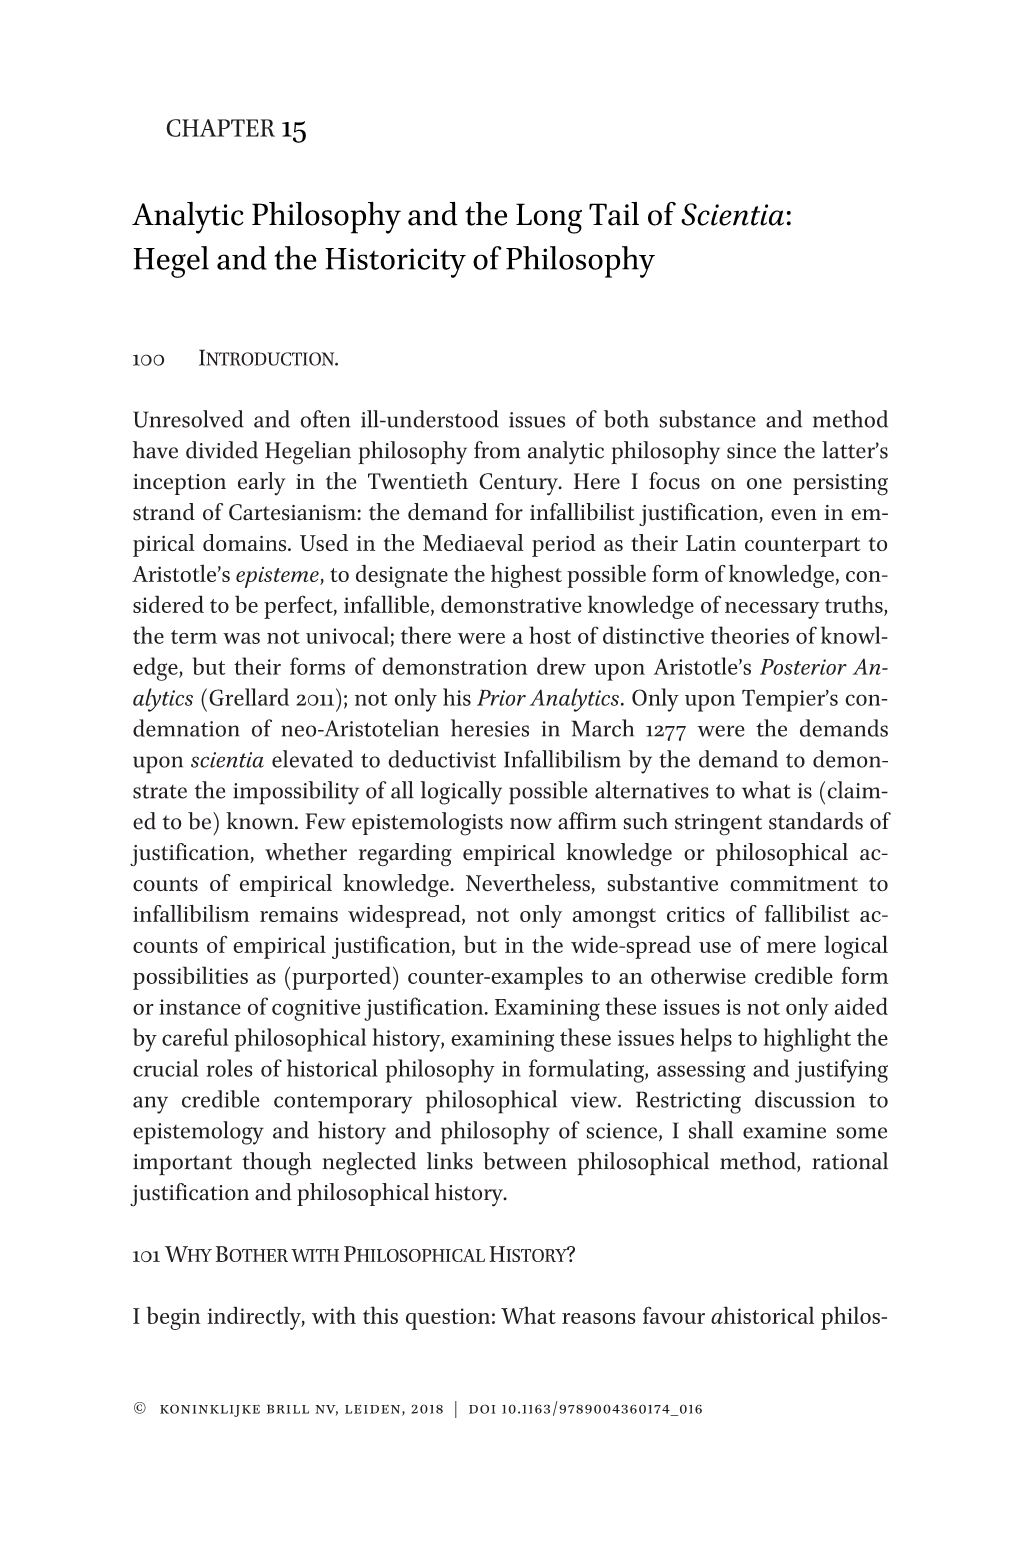 Analytic Philosophy and the Long Tail of Scientia: Hegel and the Historicity of Philosophy